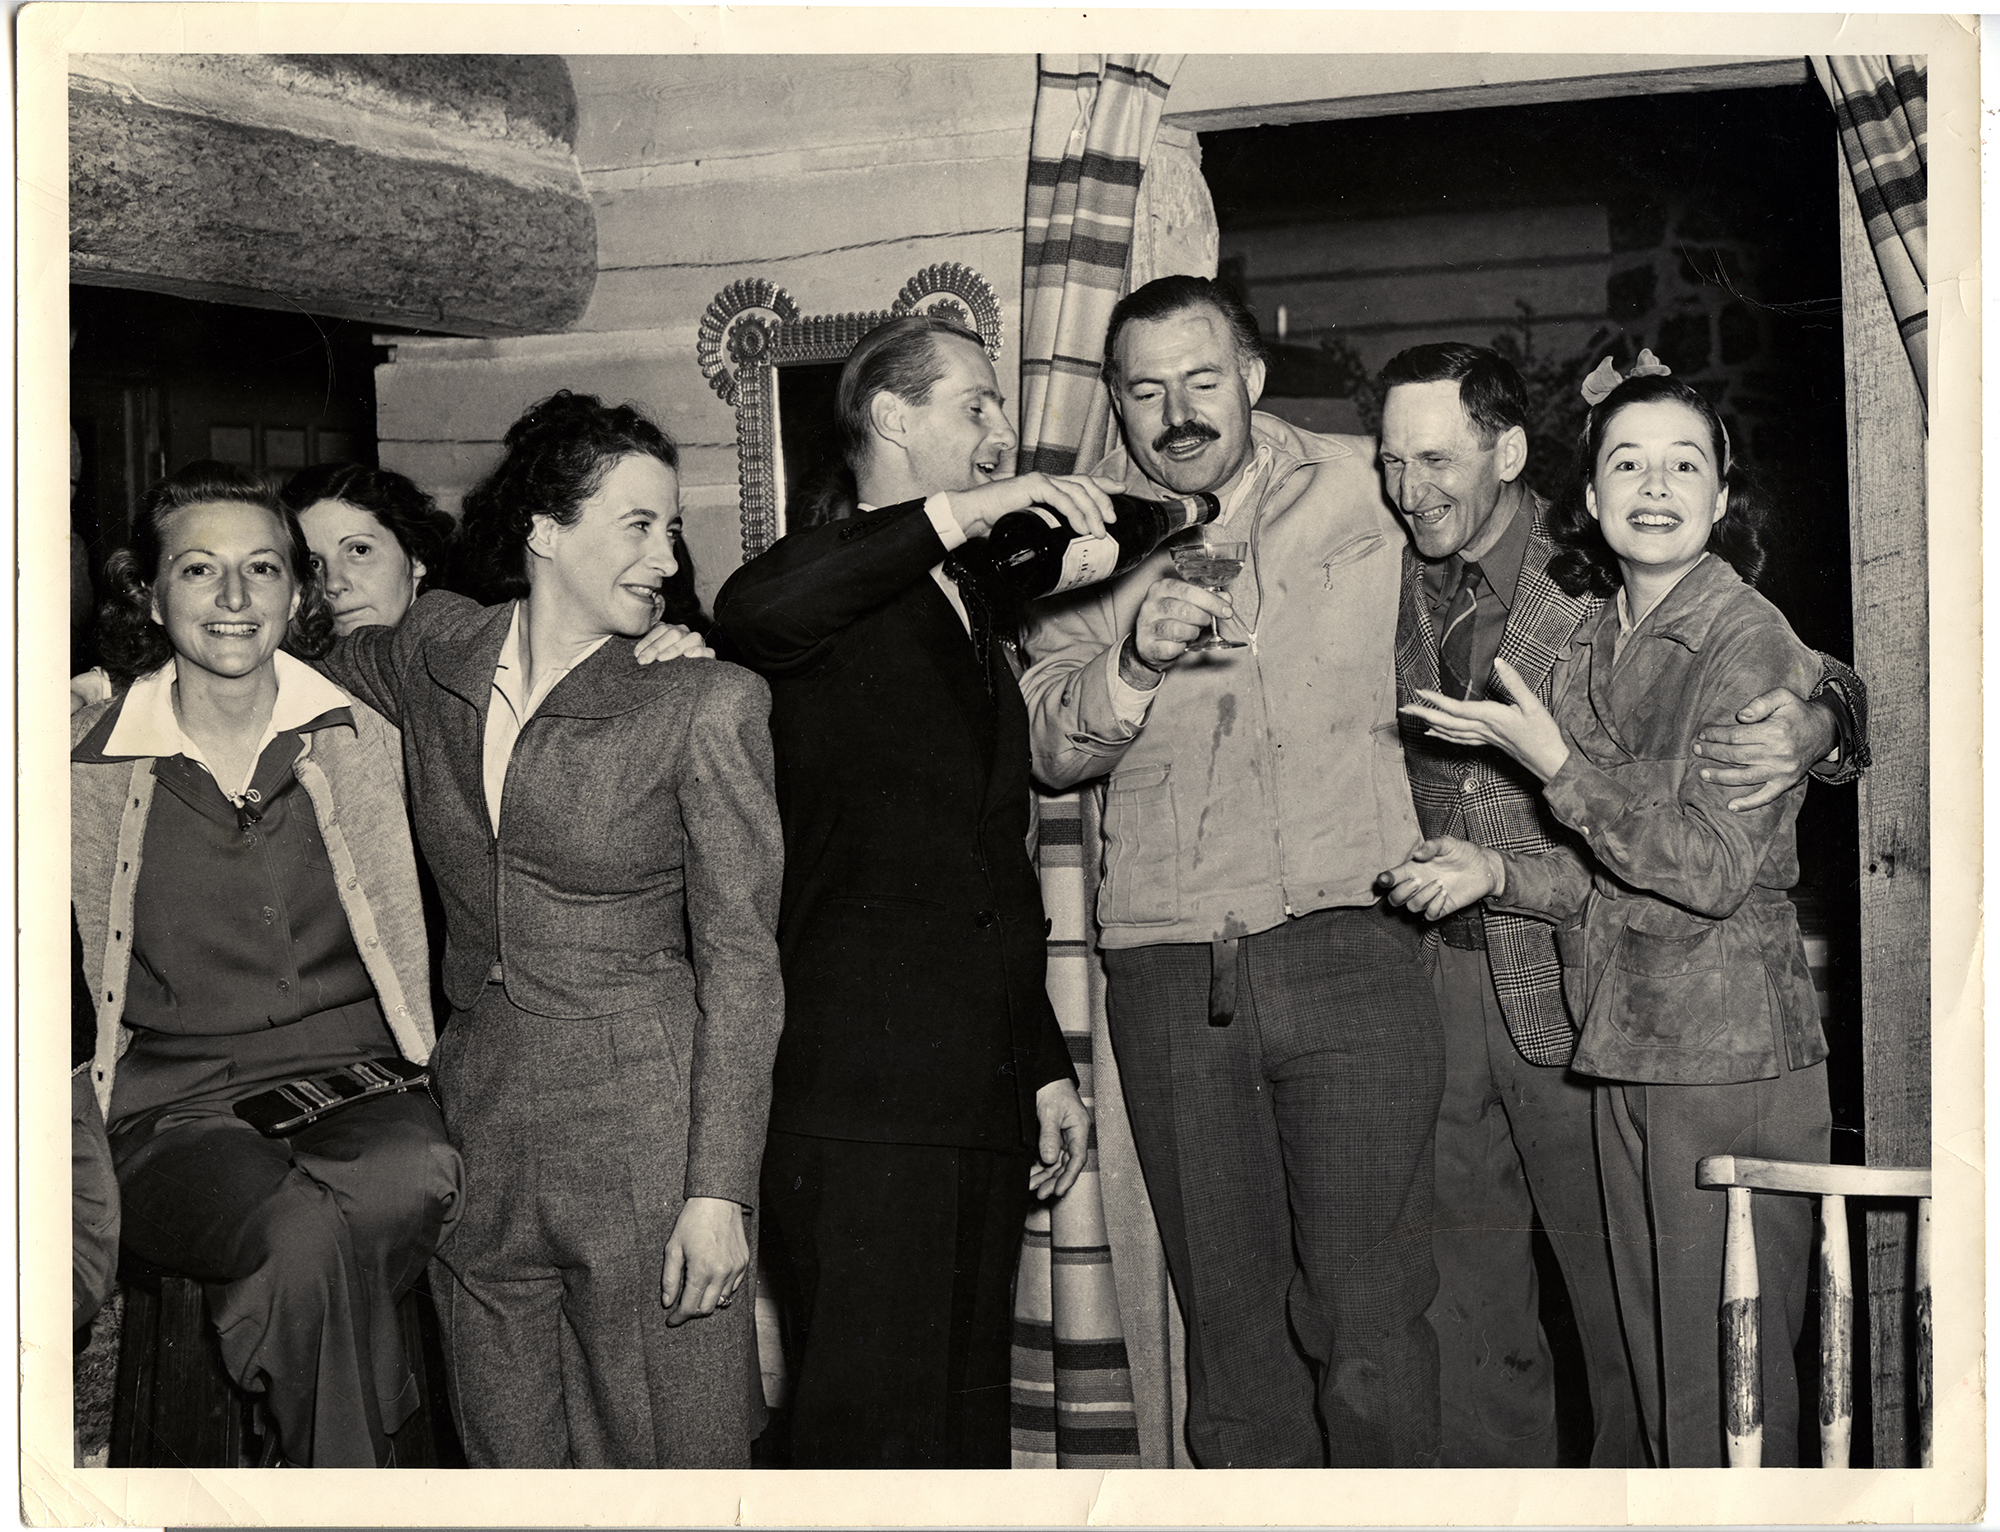 A black and white photograph, slightly sepia with age, showing Ernest Hemingway and six other people (four women; two men) at a party in a log cabin.  All are dressed casually save one man who is pouring champagne into Hemingway's glass; he wears a dark suit, white shirt, and tie.